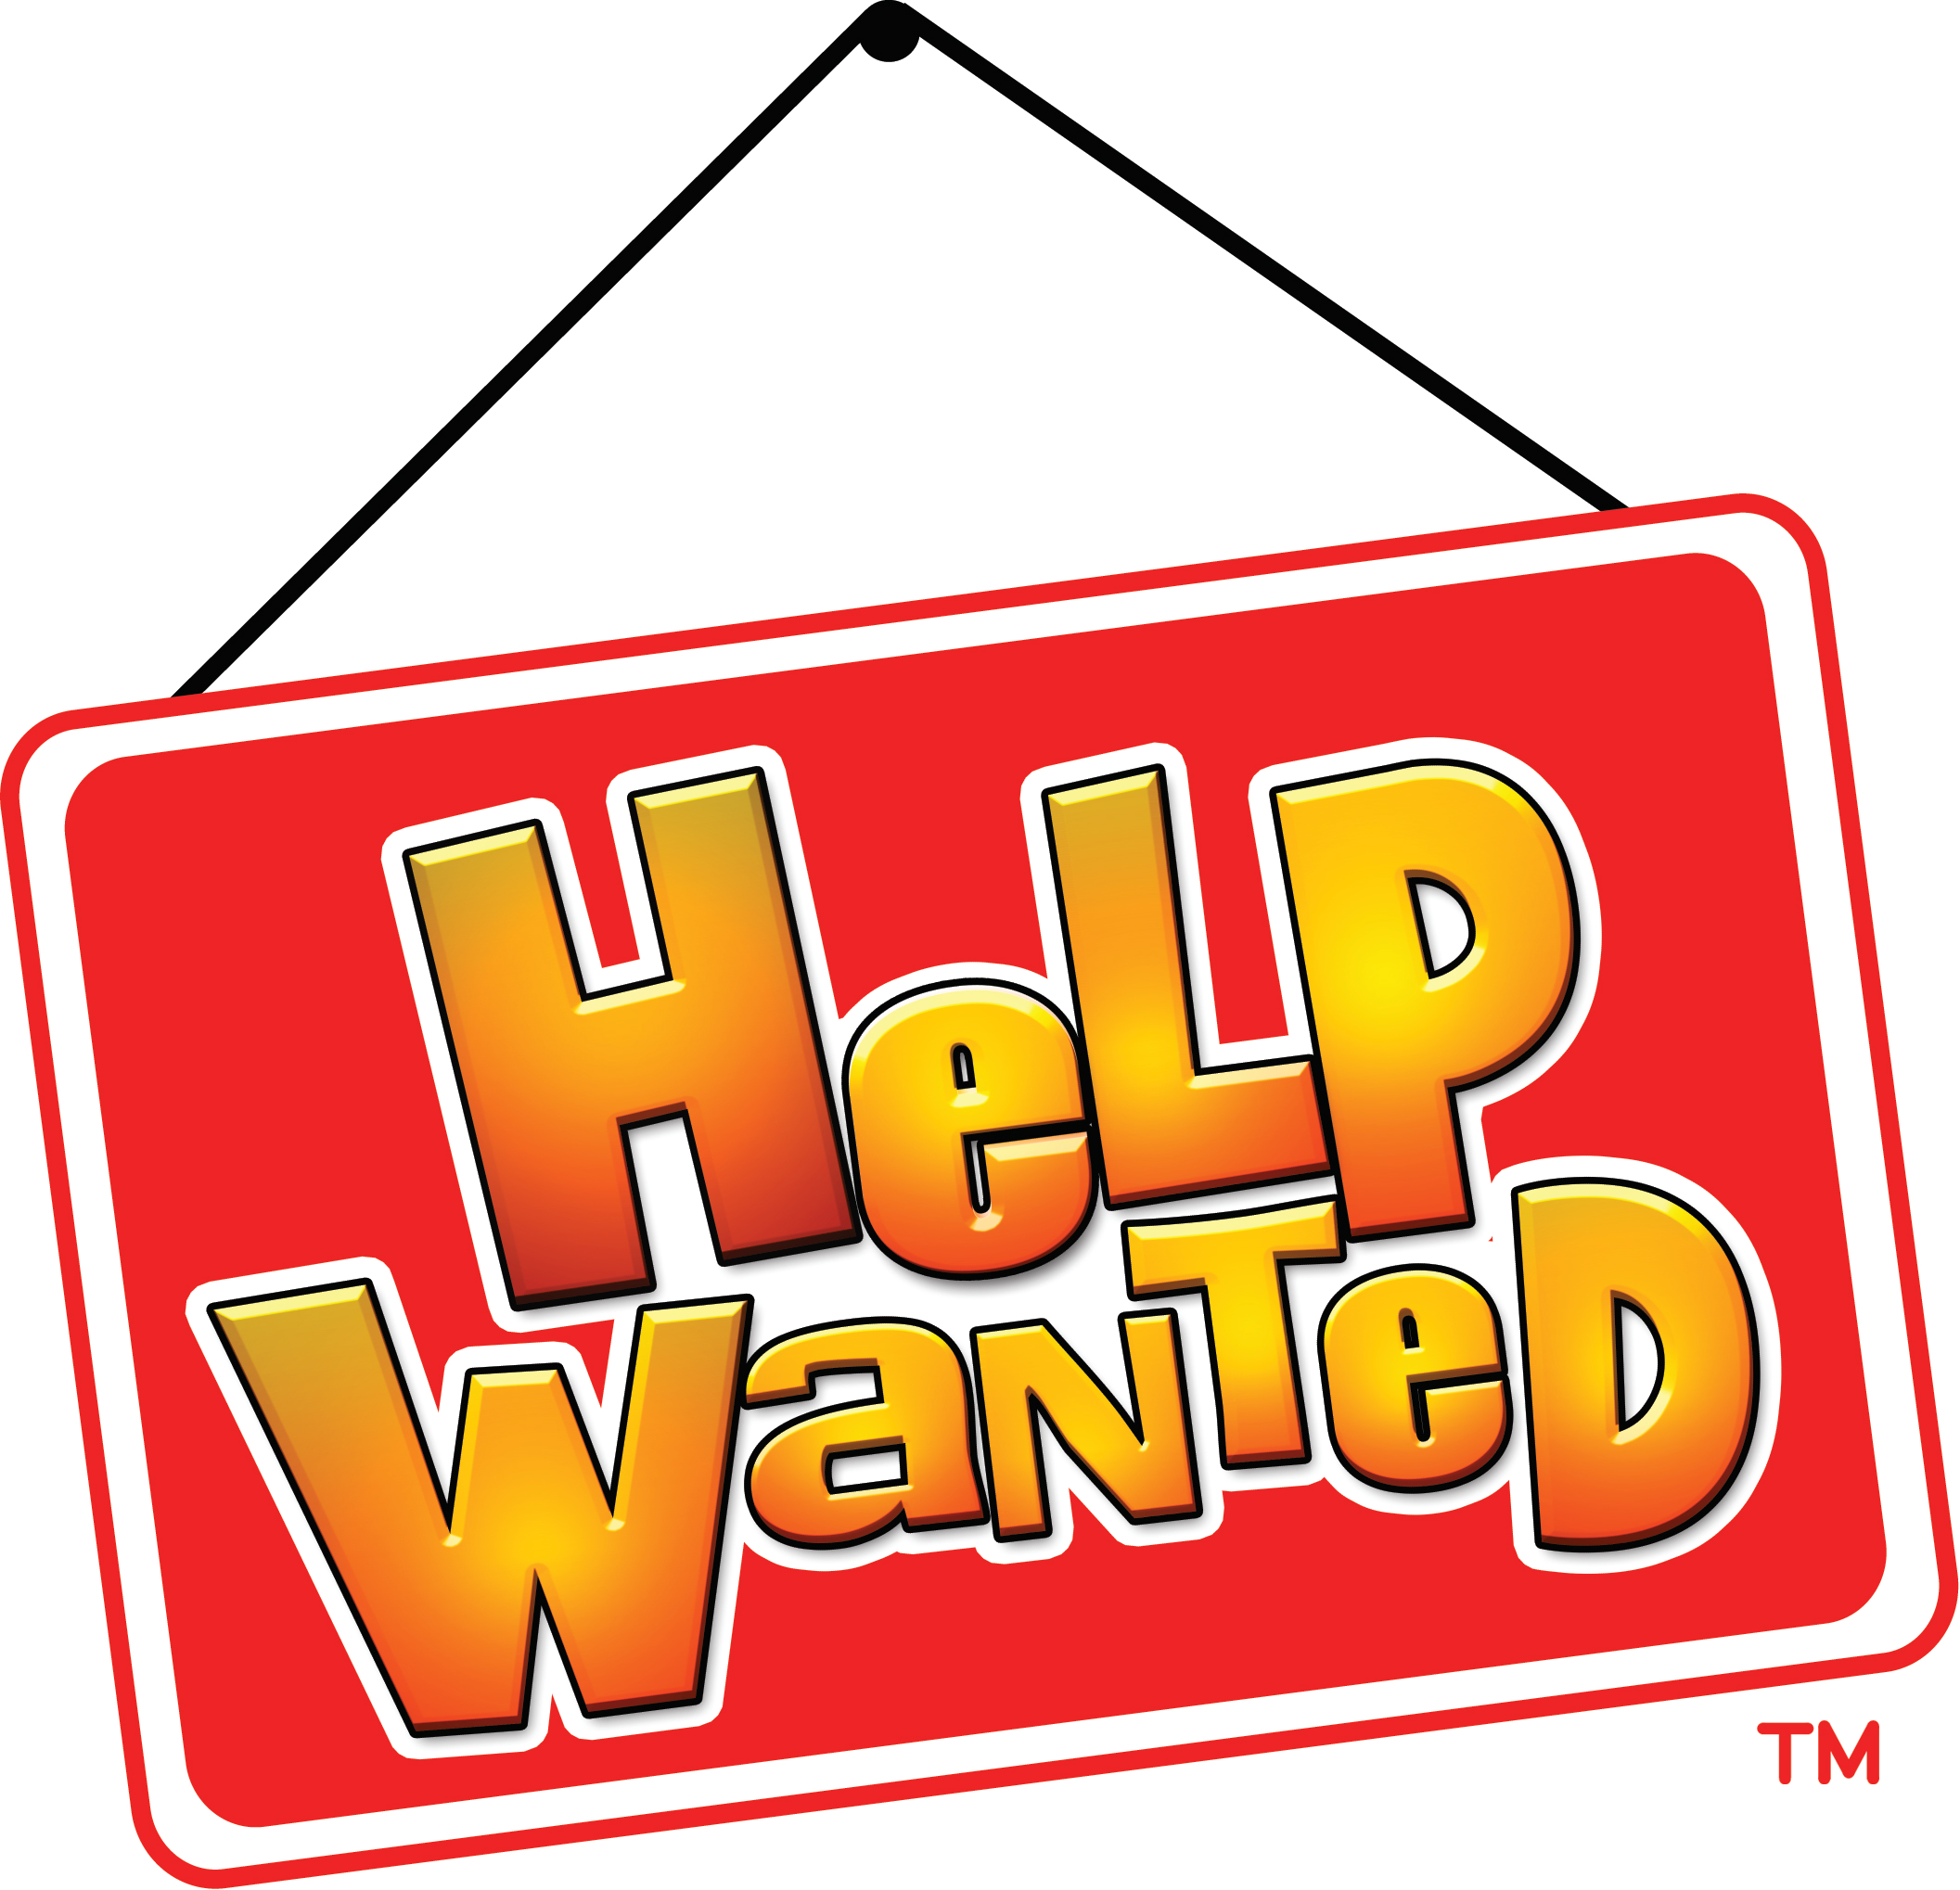 Help Wanted  April 09 2014   Clipart Panda   Free Clipart Images